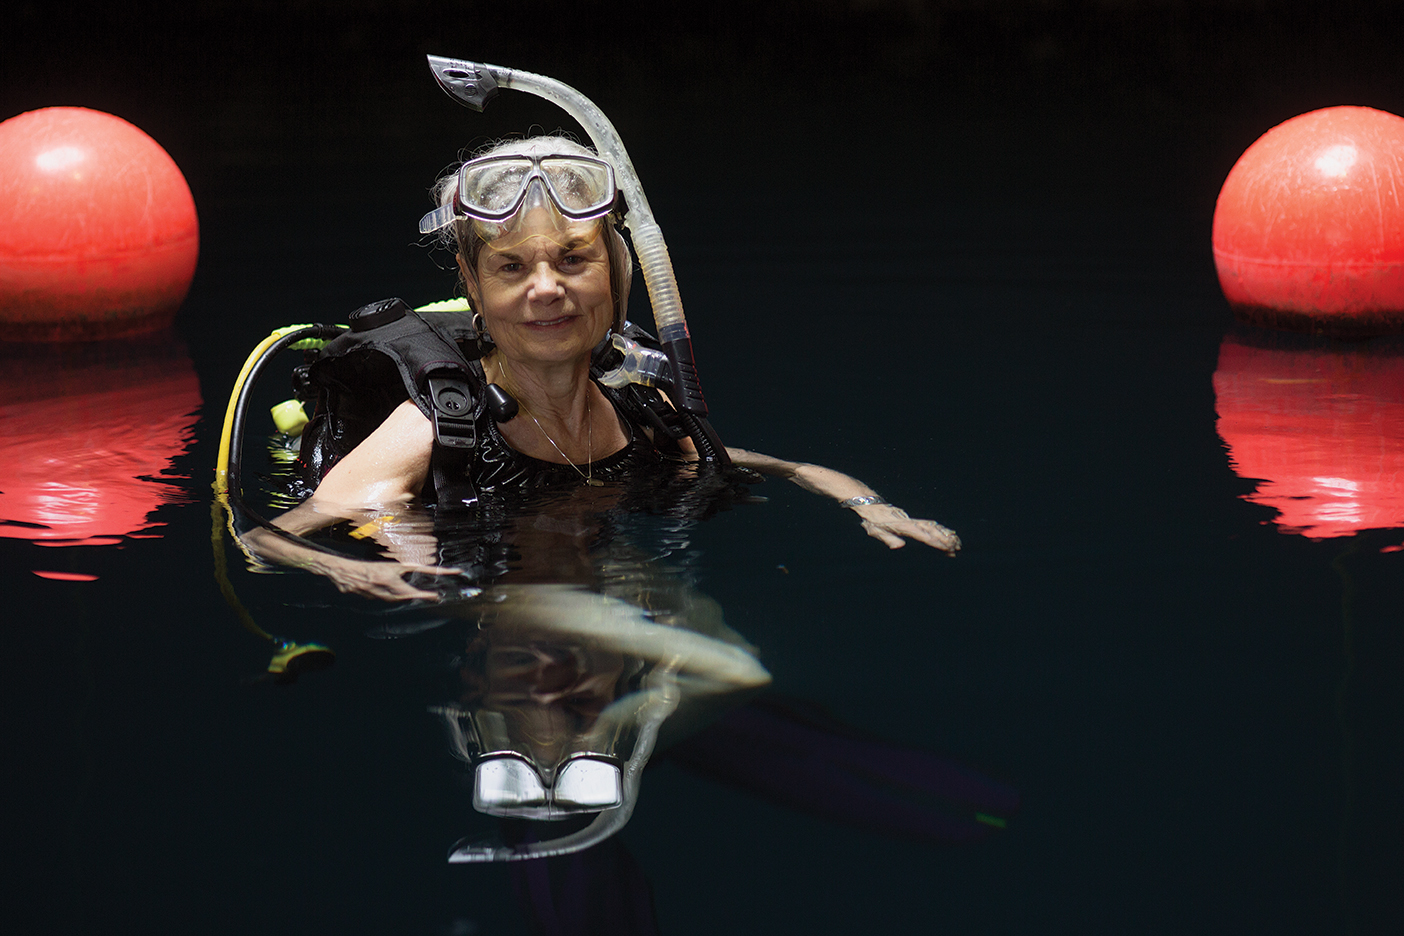 Barbara Culagga floats in water with her scuba gear on